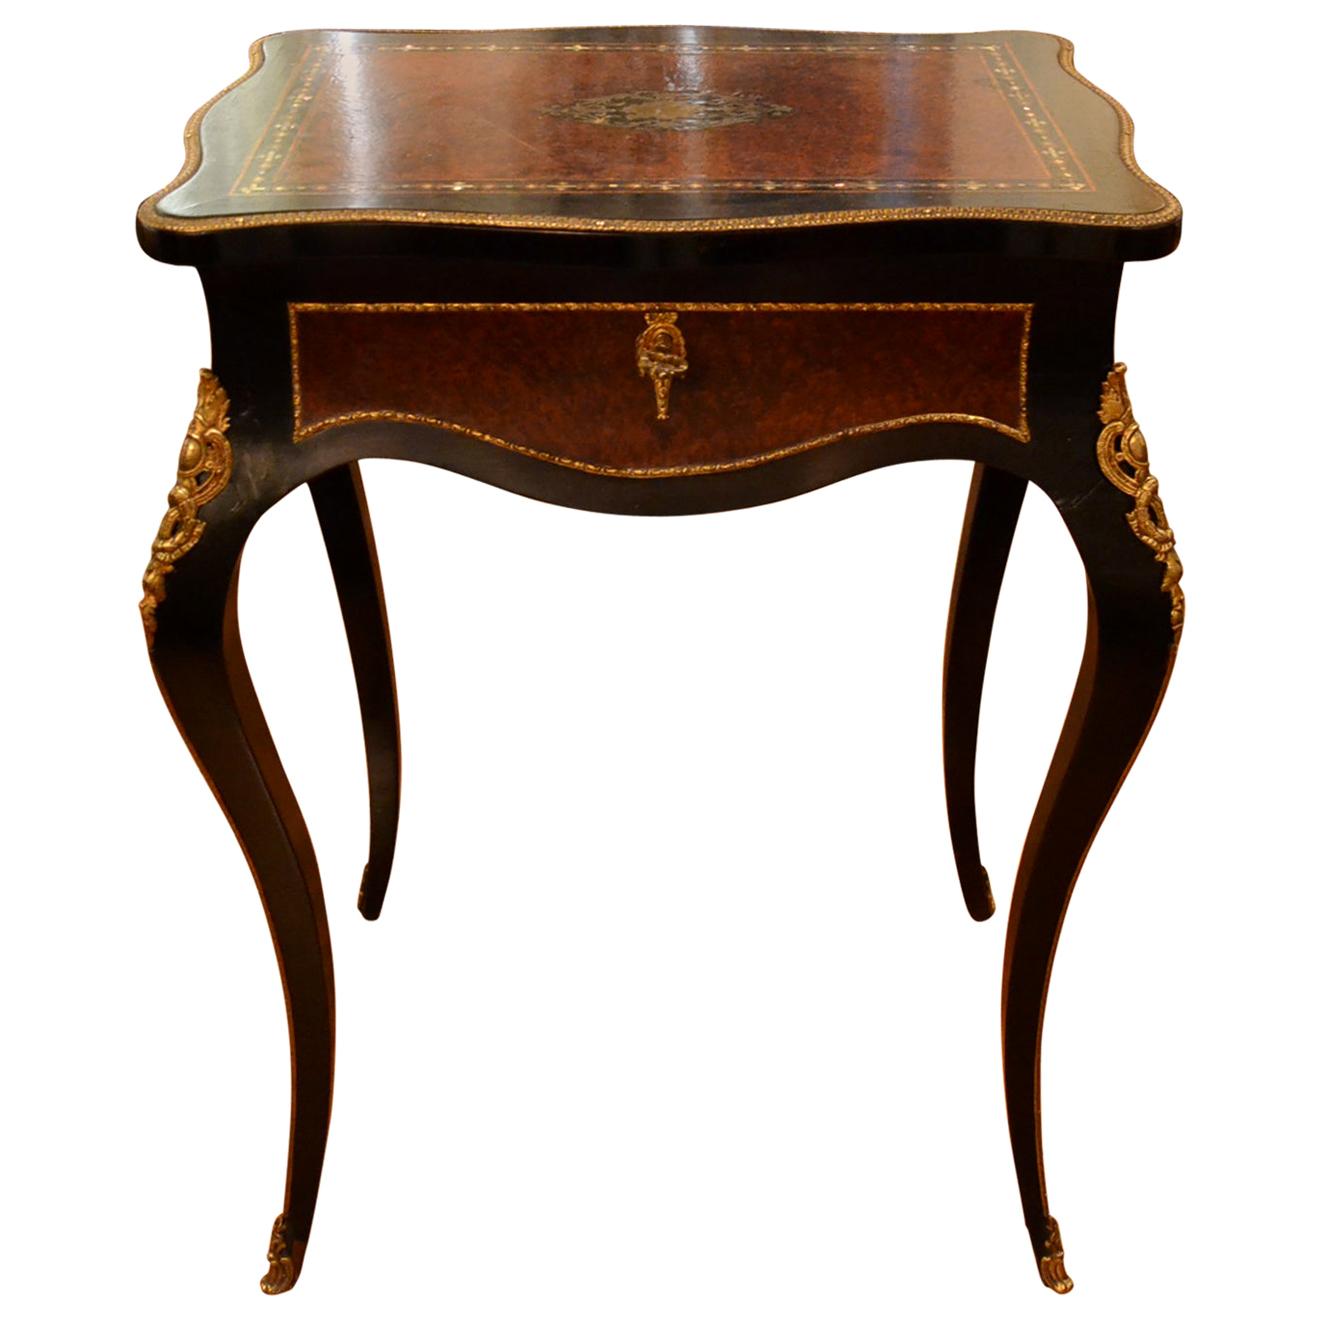 Antique French Napoleon III Inlaid Wood Gold Ormolu Dressing Table, circa 1860 For Sale